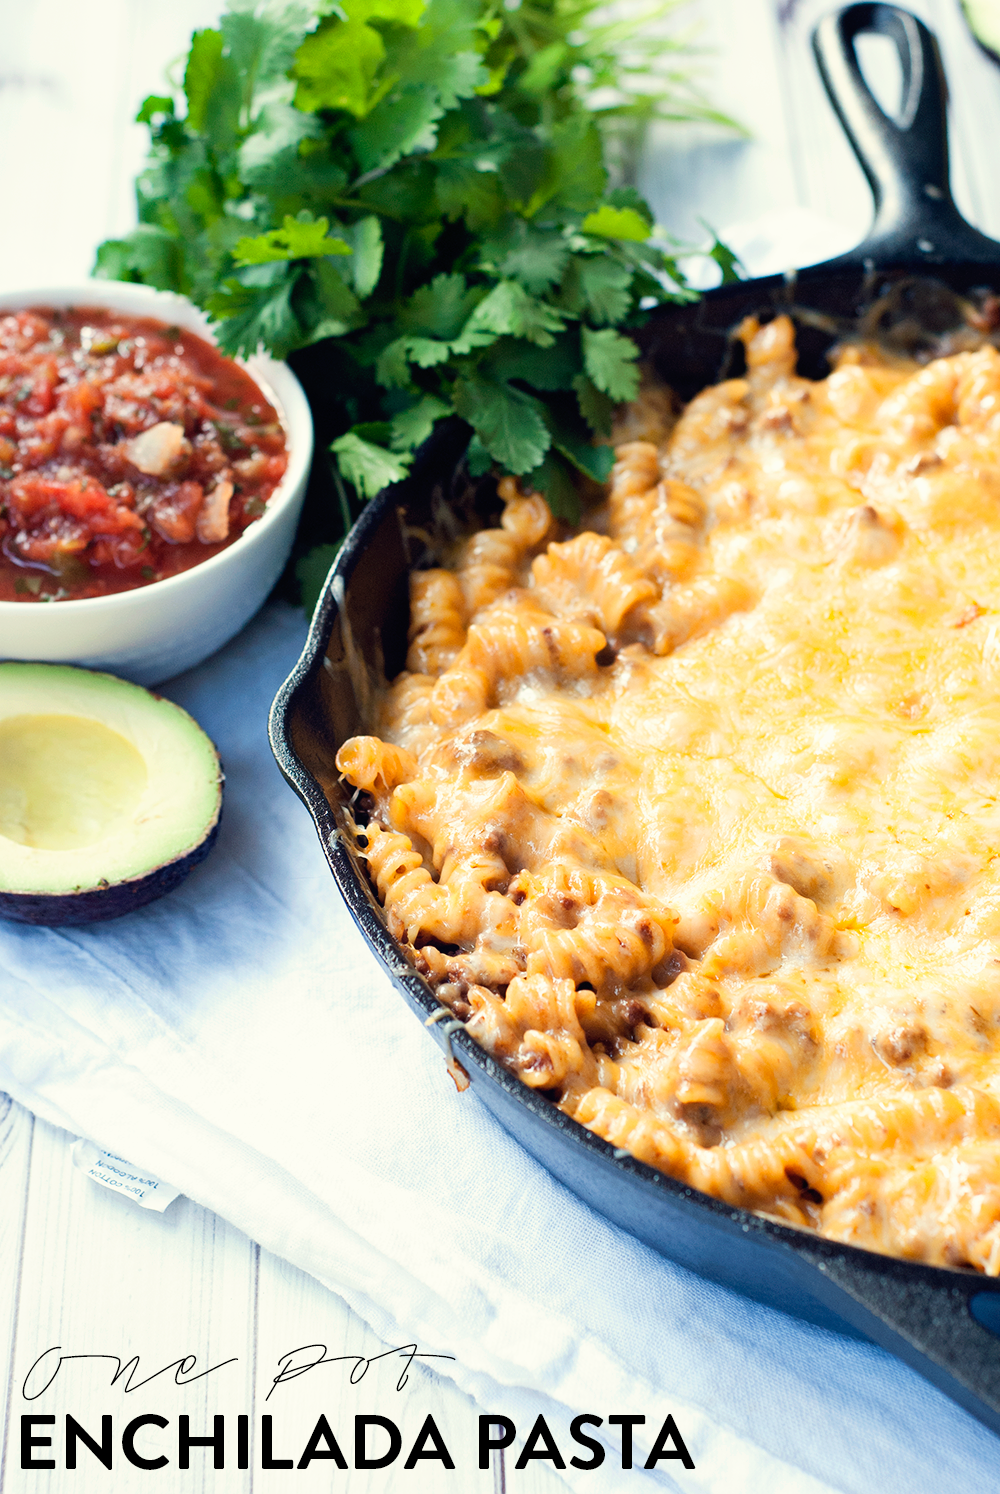 This one pot enchilada pasta proves that Mexican food means more than just tortillas! I could make this everyday, it's so delicious!